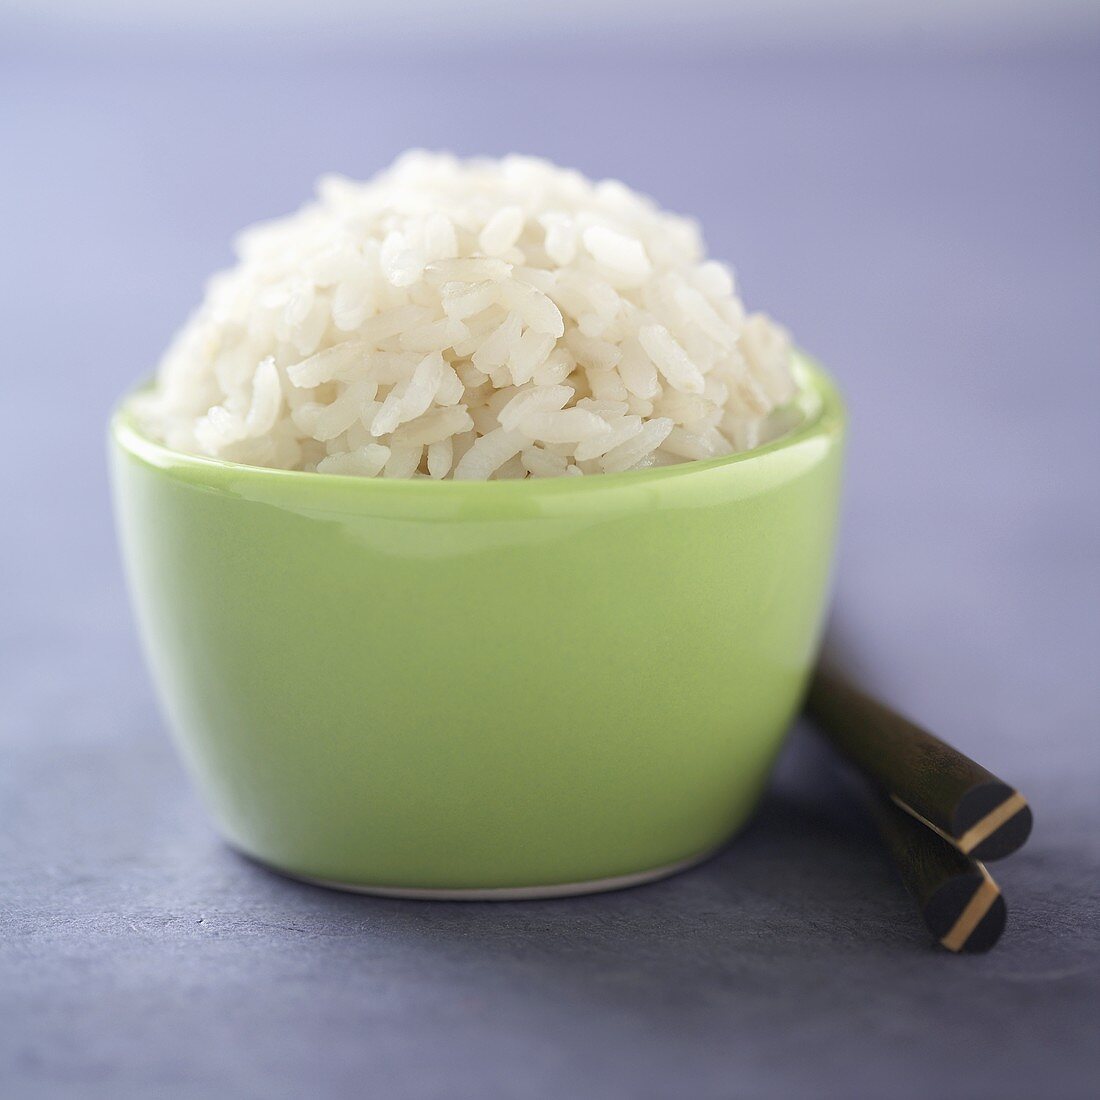 Small Green Bowl of Cooked White Rice, Chopsticks